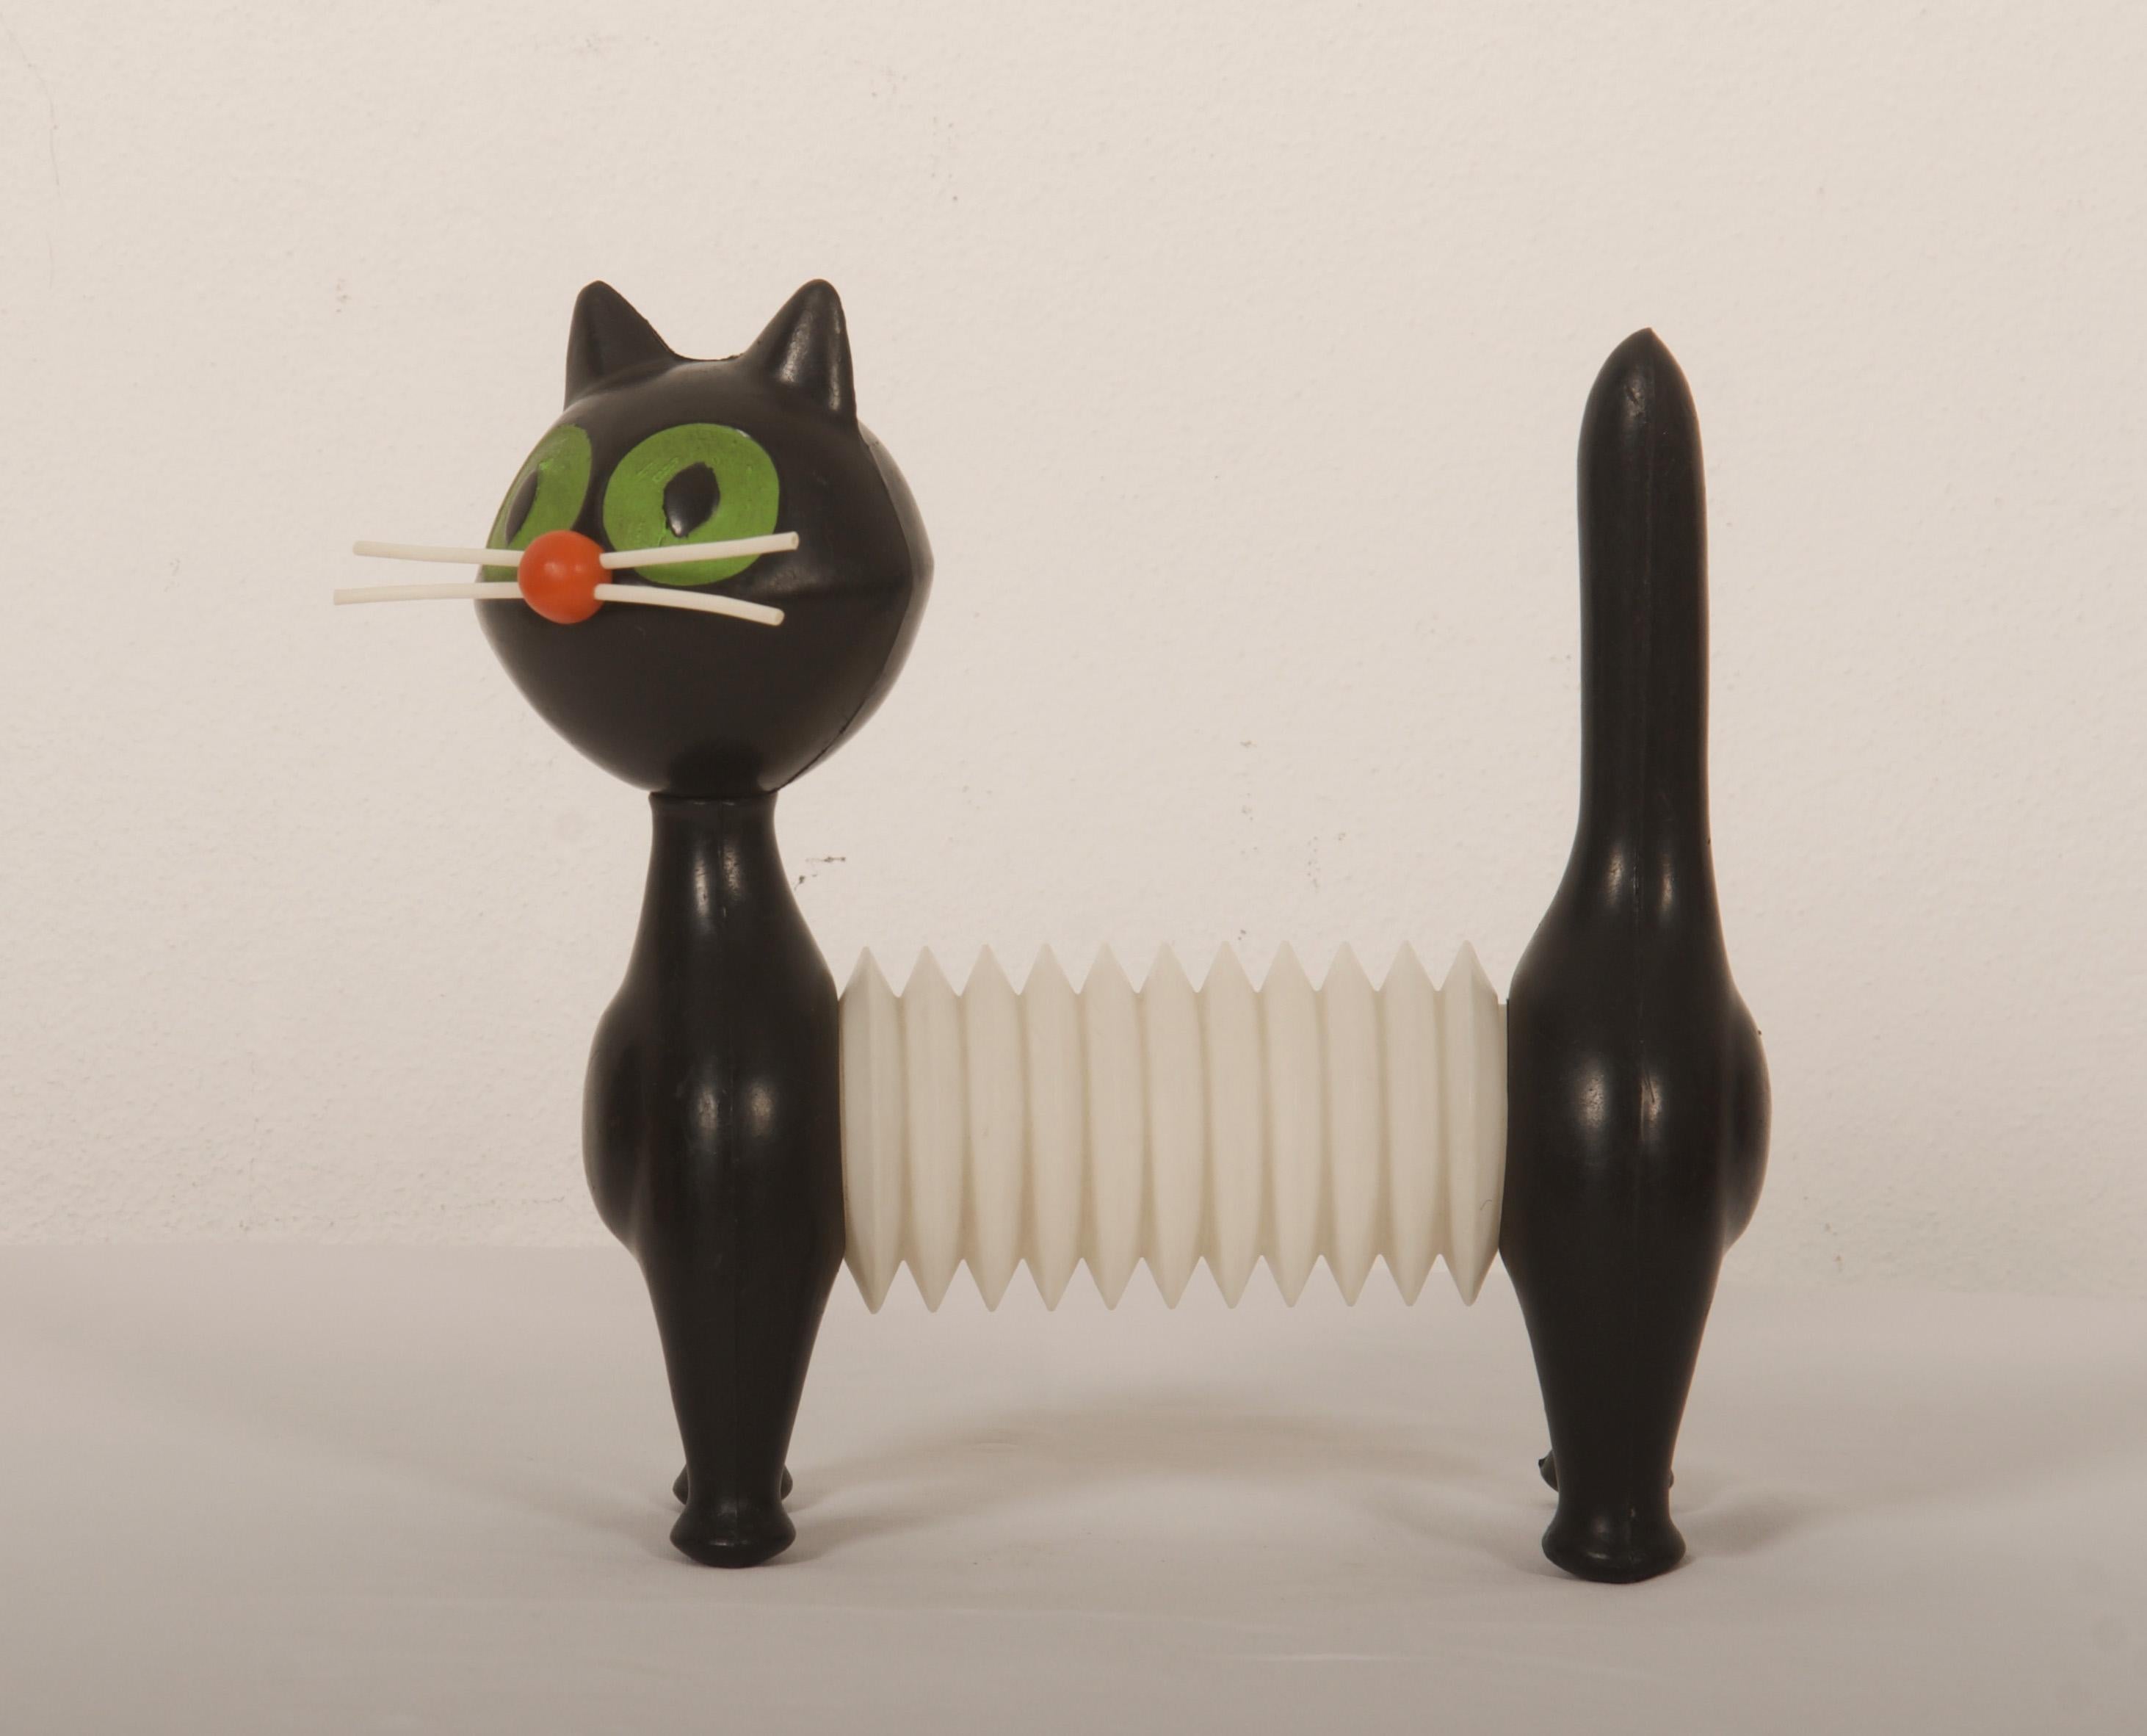 Libuse Niklova for Fatra Napajedla, Czechoslovakia, four-legged construction in the shape of an abstract cat made of different colored plastic (black, white, orange and green). Marked with manufacturer's mark. 
Lit.: Czech 100 Desig Icons, p. 46.